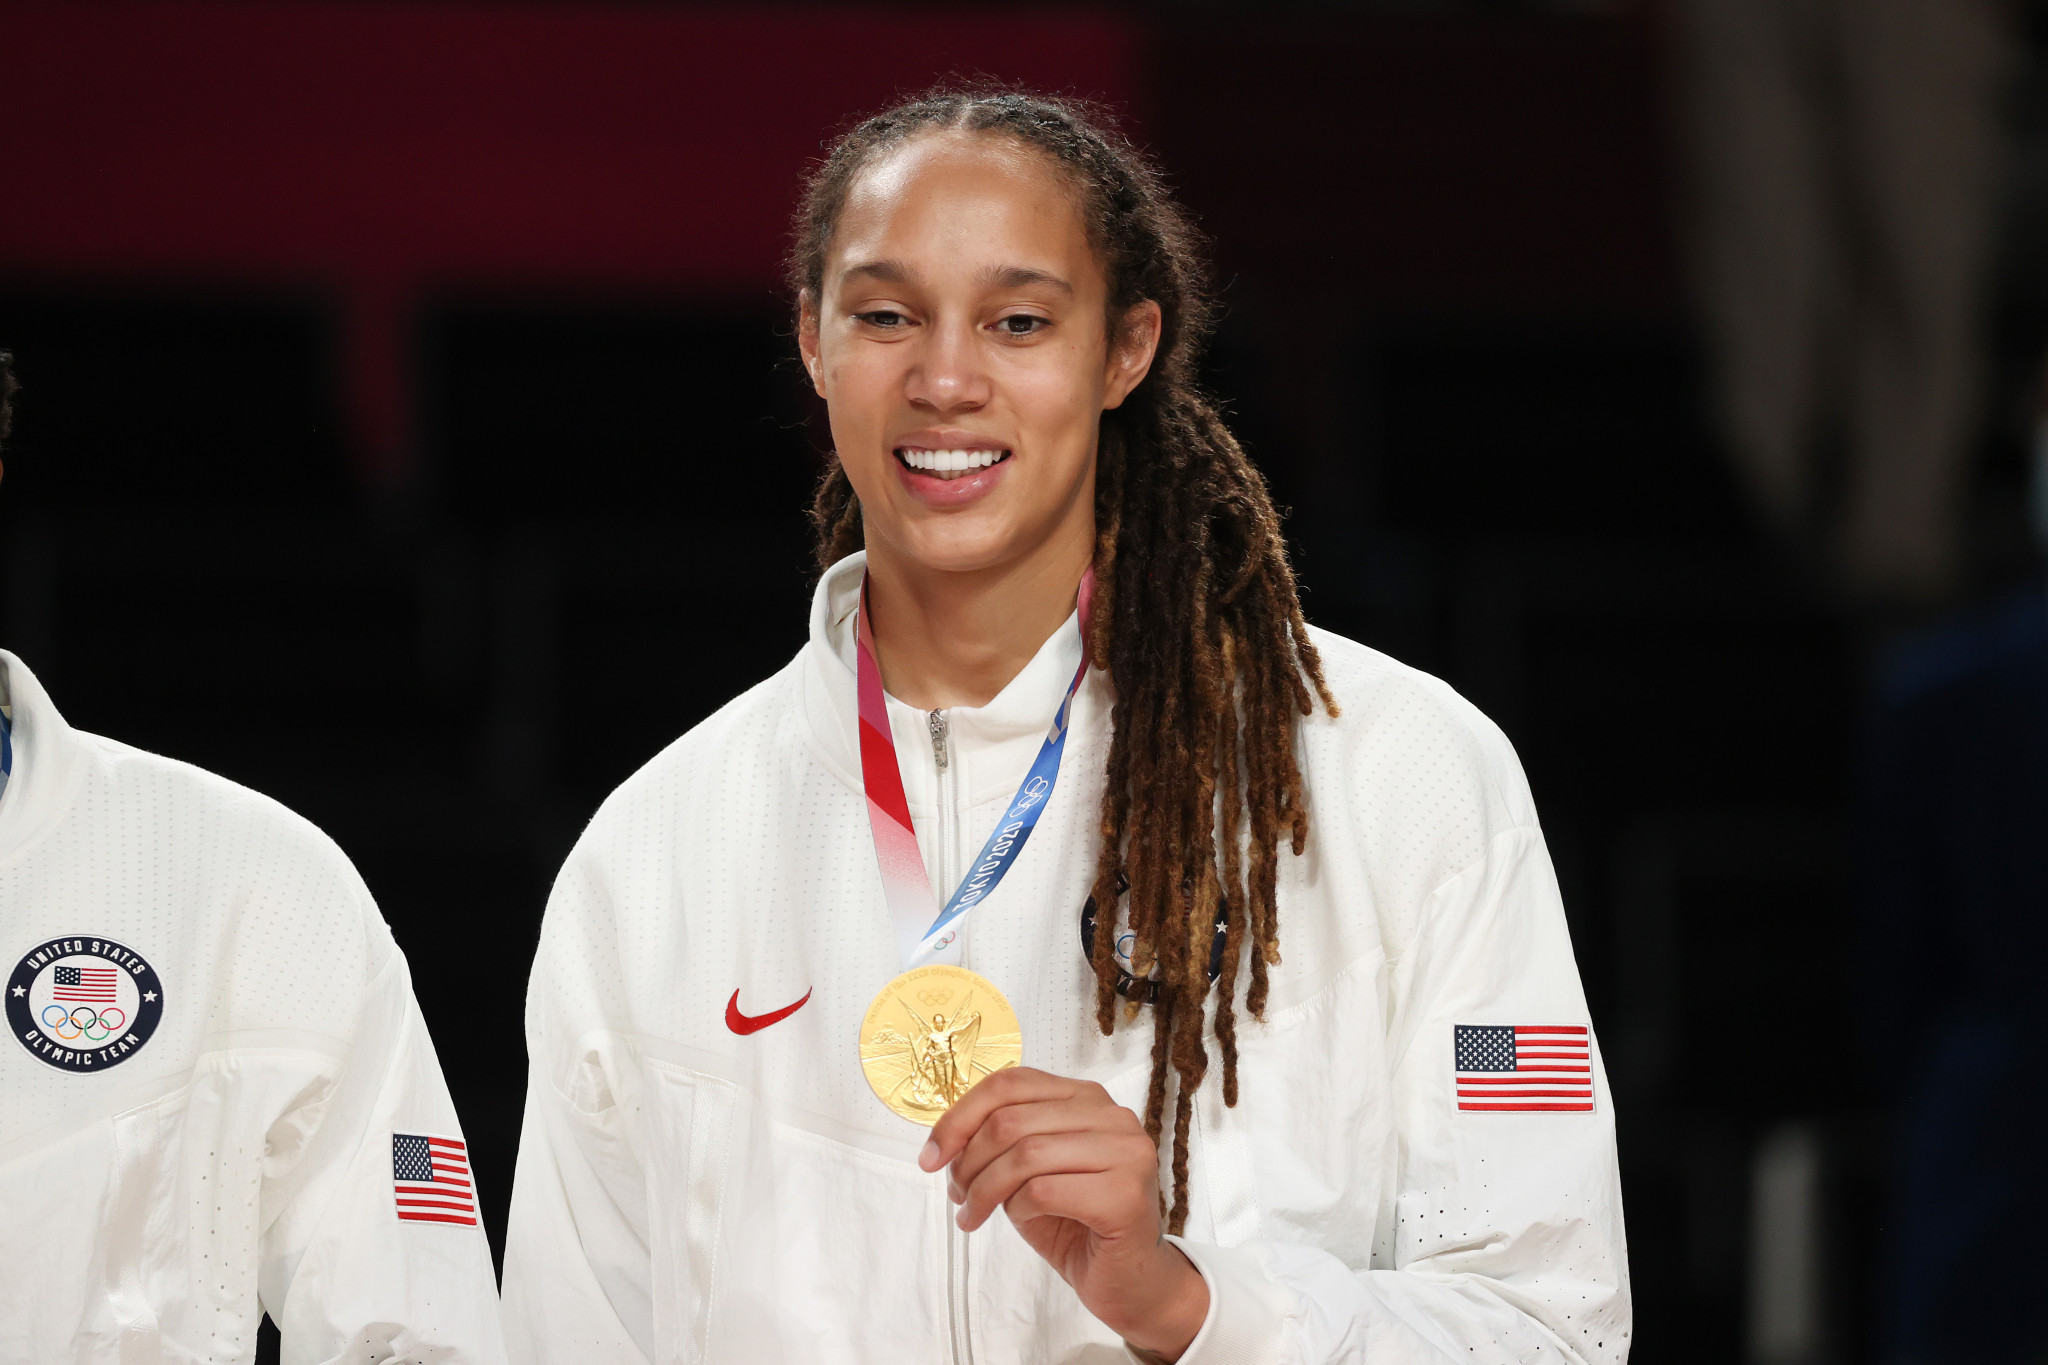 Brittney Griner helped the US to women's basketball gold at the Rio 2016 and Tokyo 2020 Olympics ©Getty Images